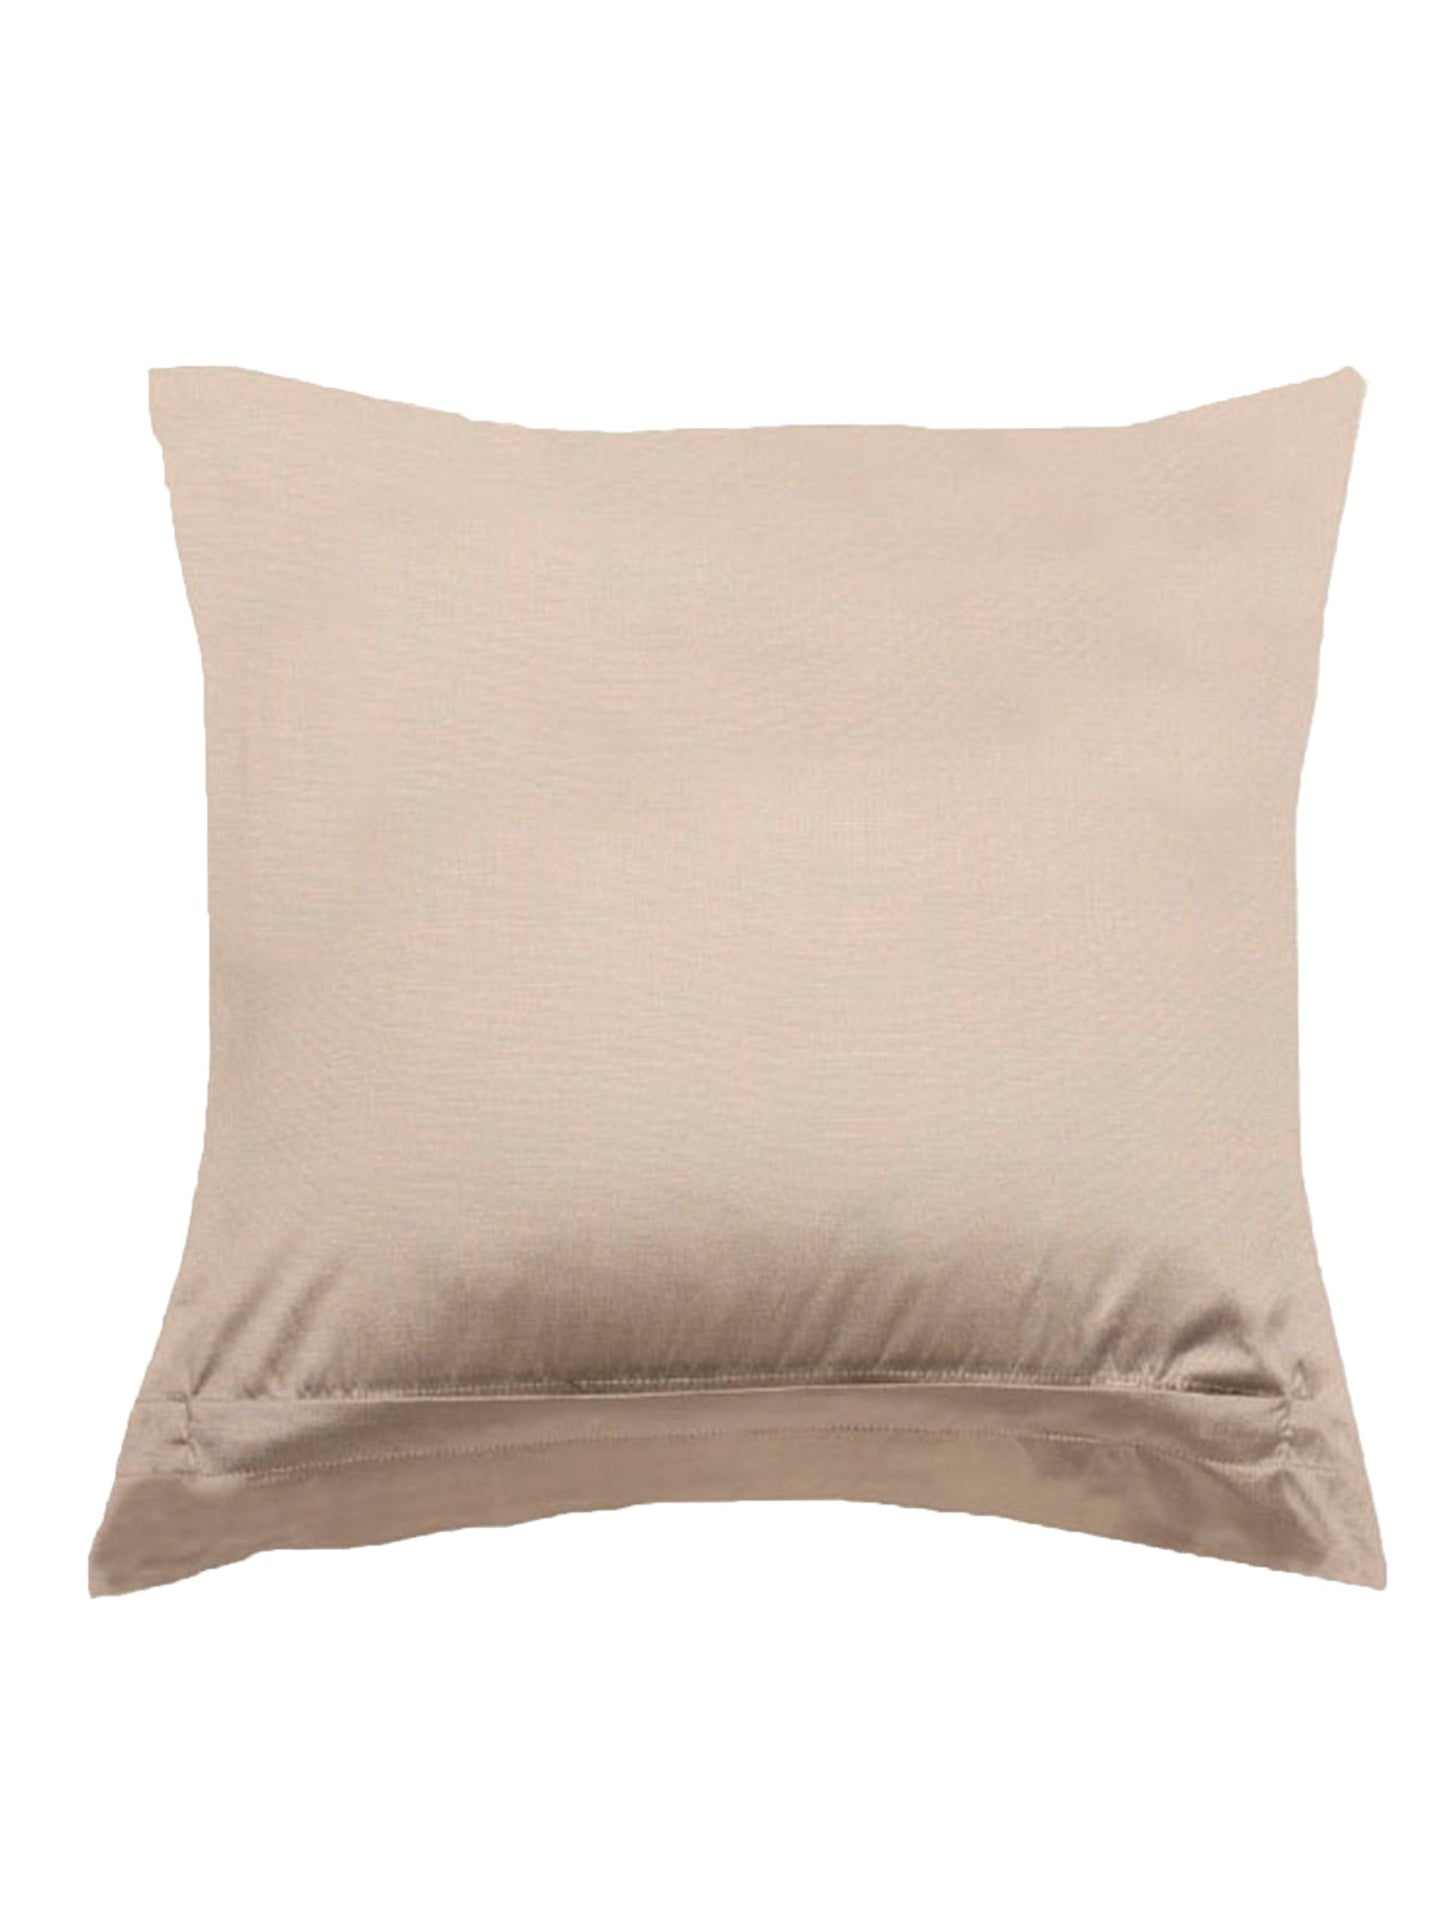 Embroidered Cushion Cover 100% Polyester  Sequin Stripes Off White - 12" X 12"